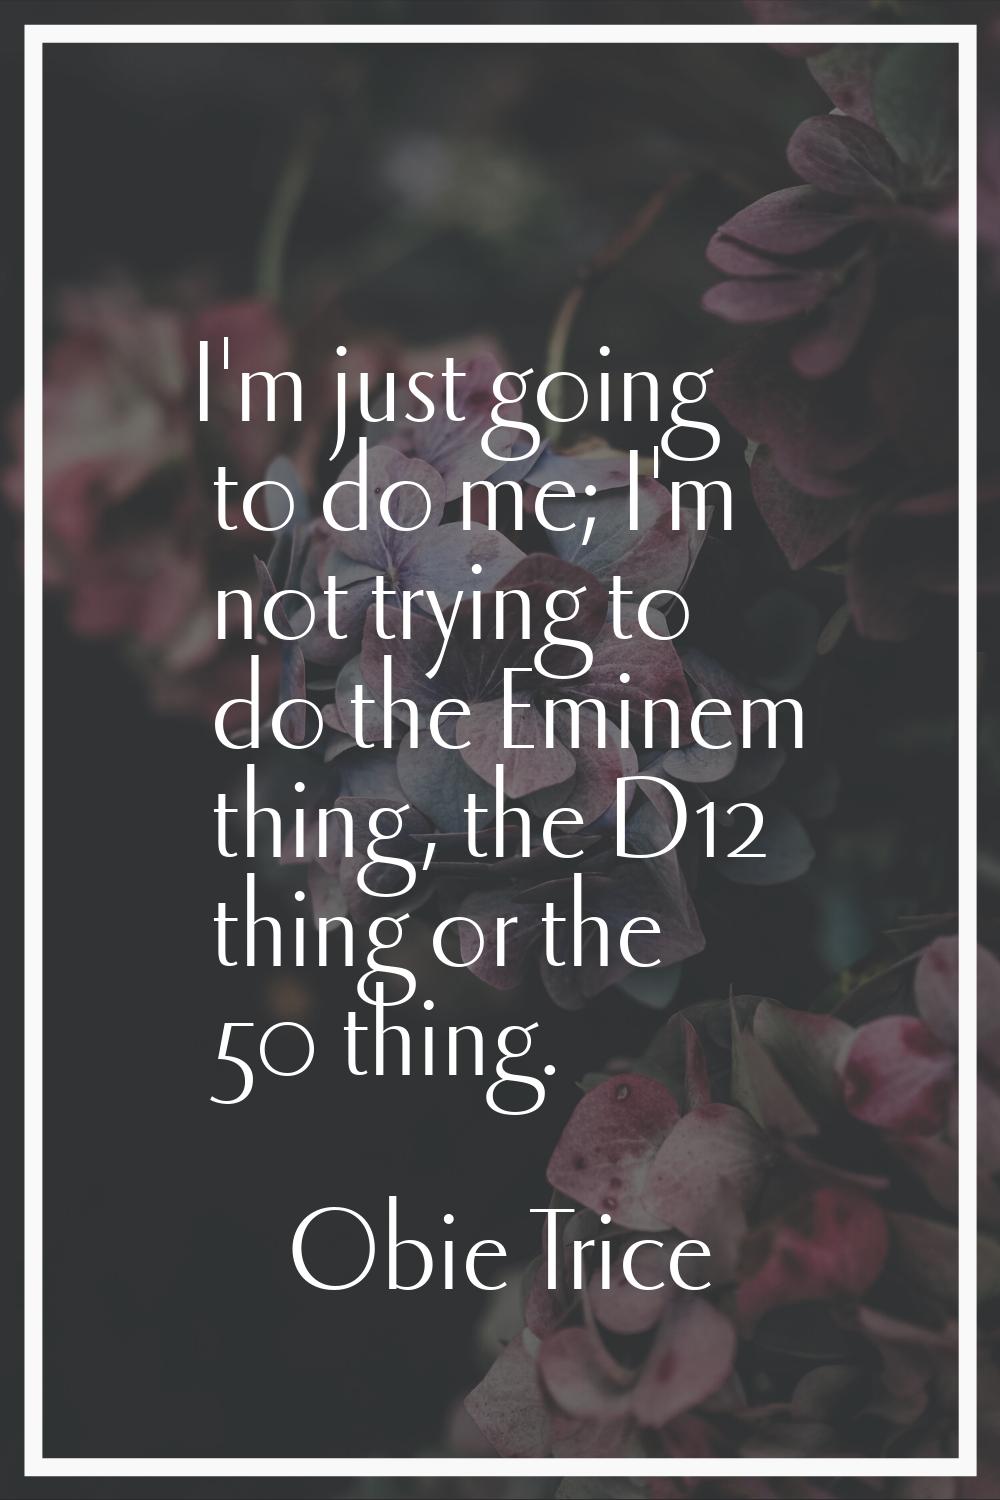 I'm just going to do me; I'm not trying to do the Eminem thing, the D12 thing or the 50 thing.